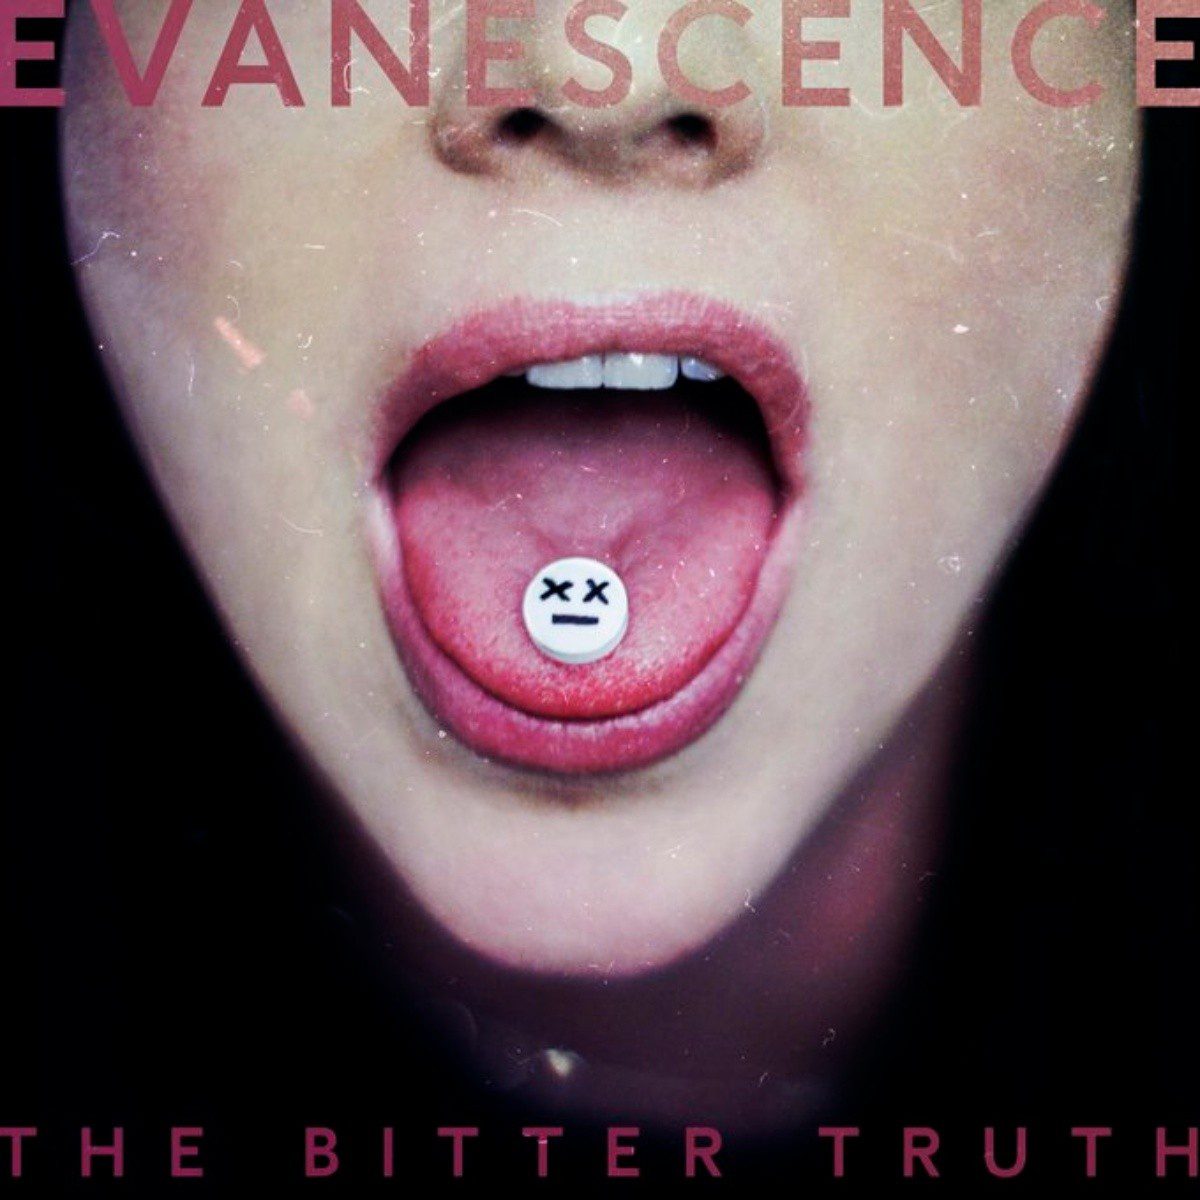 The bitter truth – Evanescence